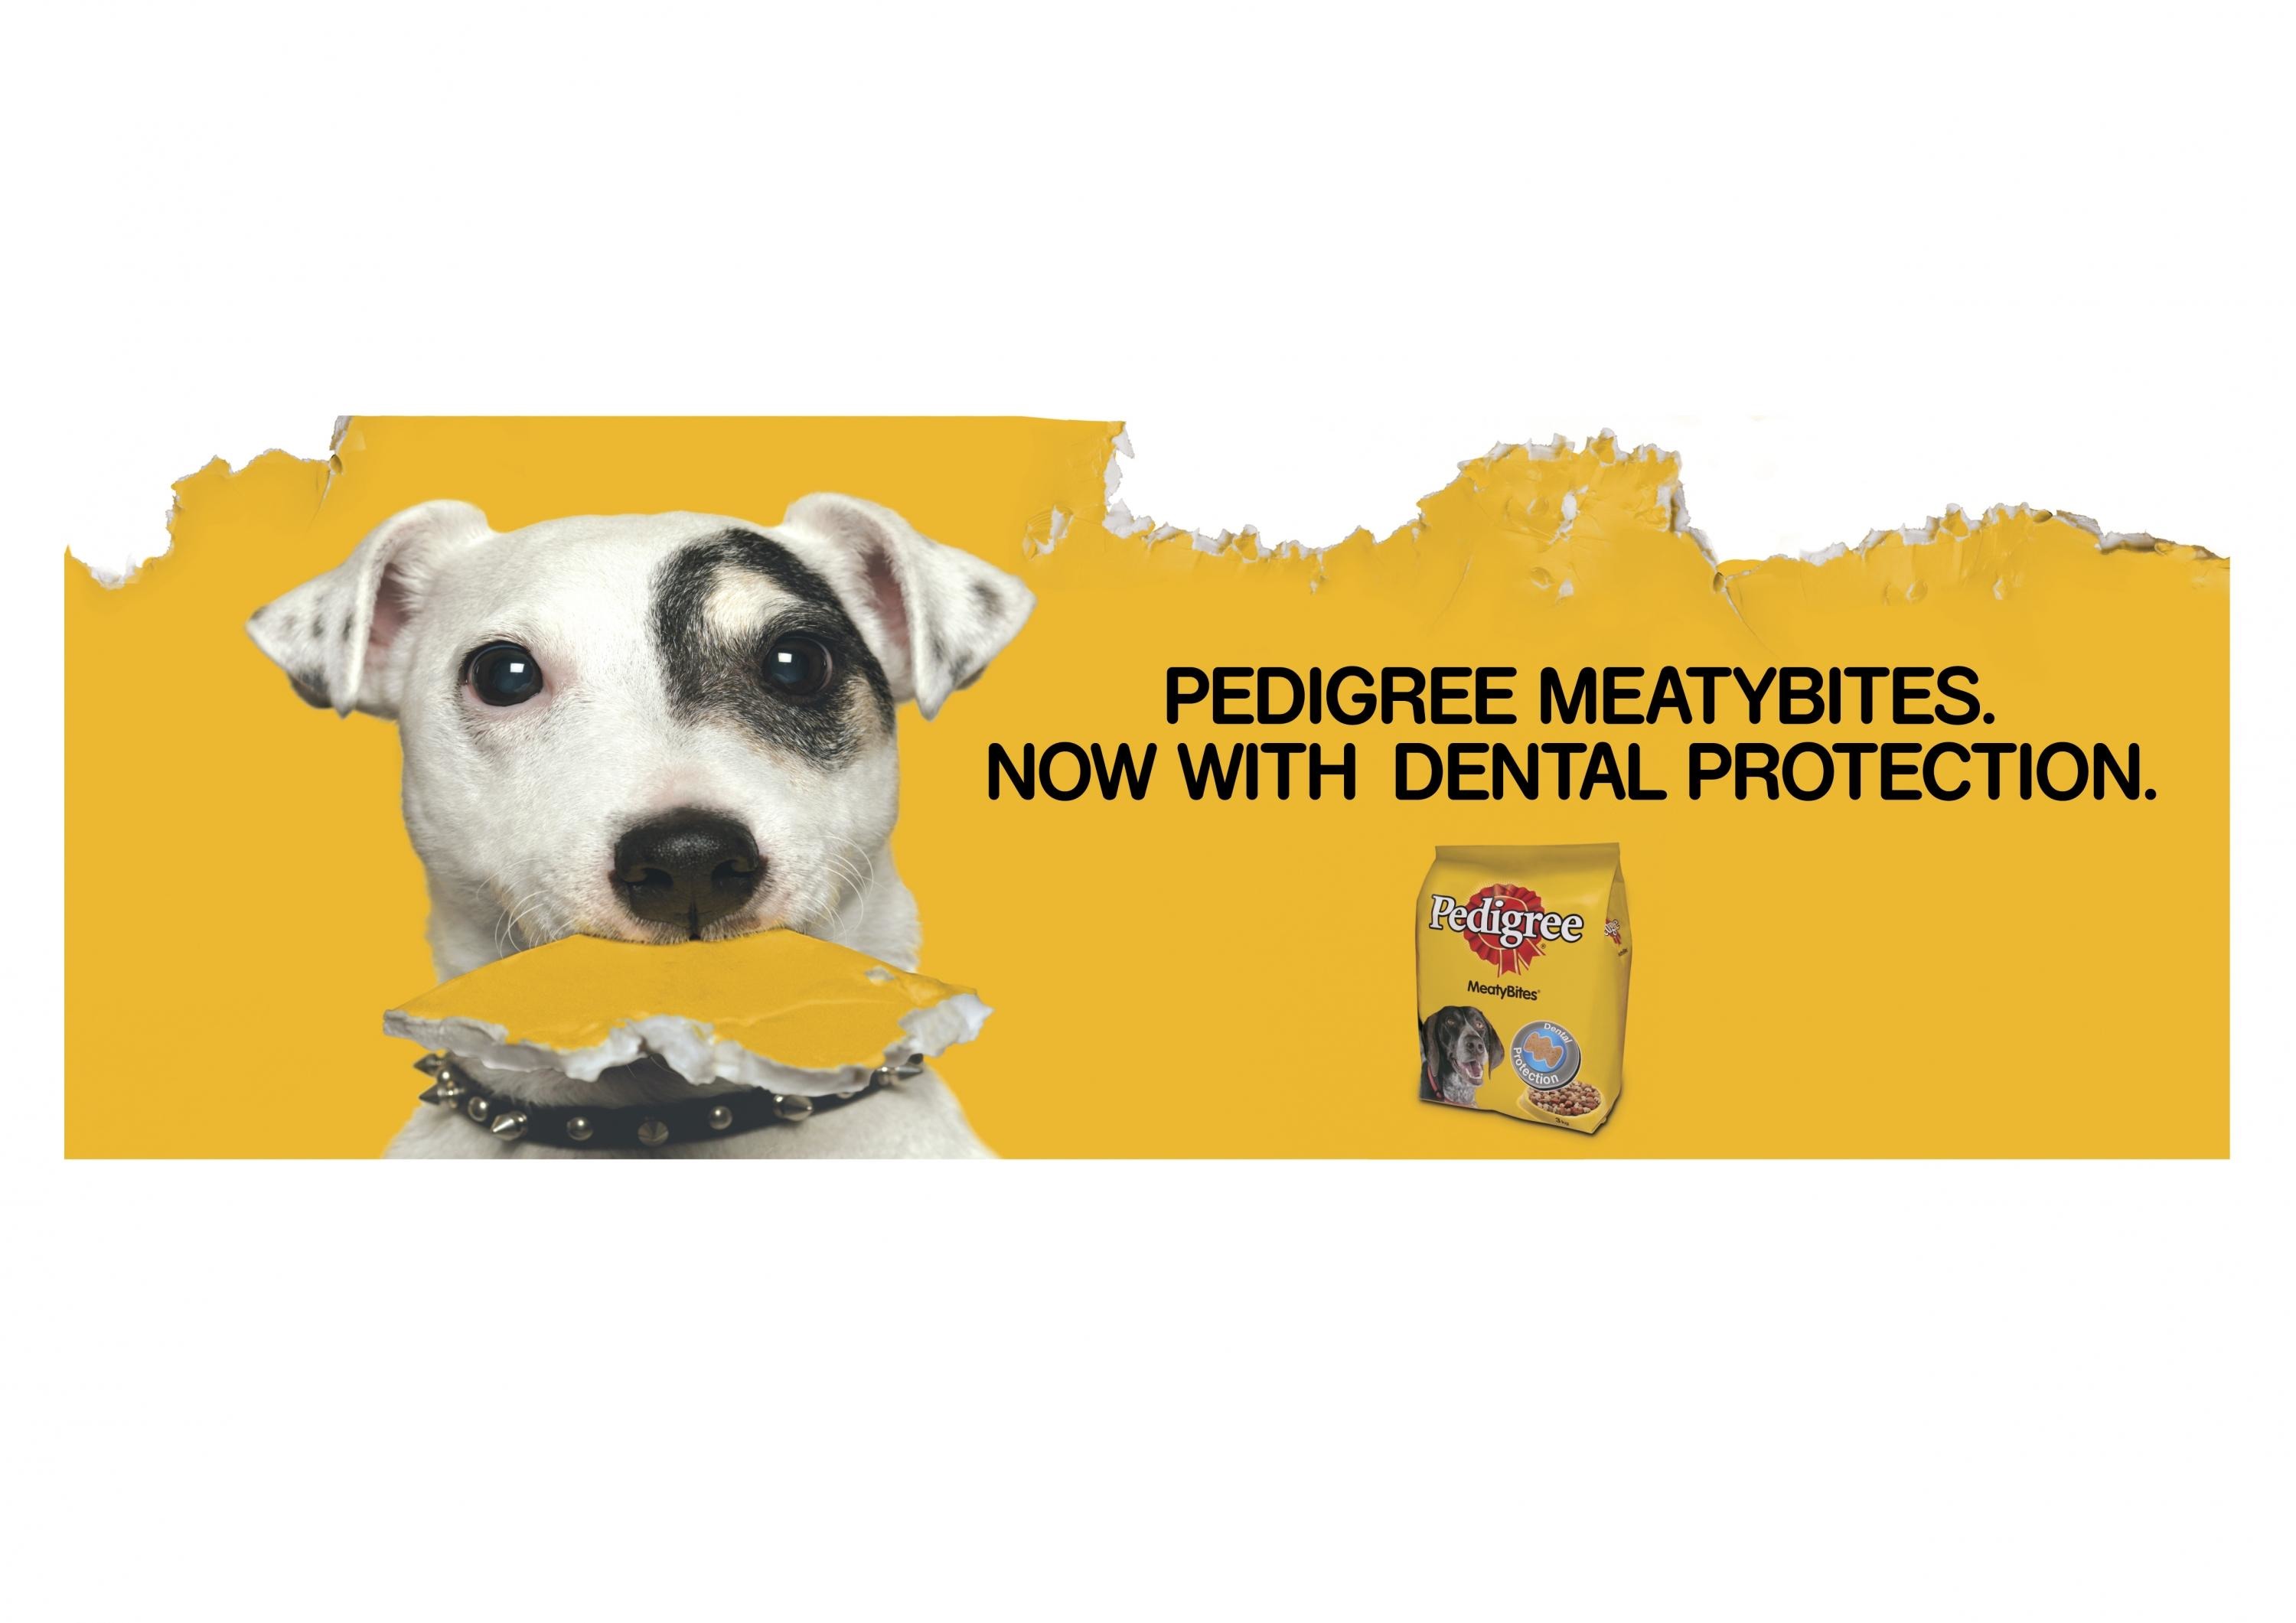 DOG FOOD WITH DENTAL PROTECTION